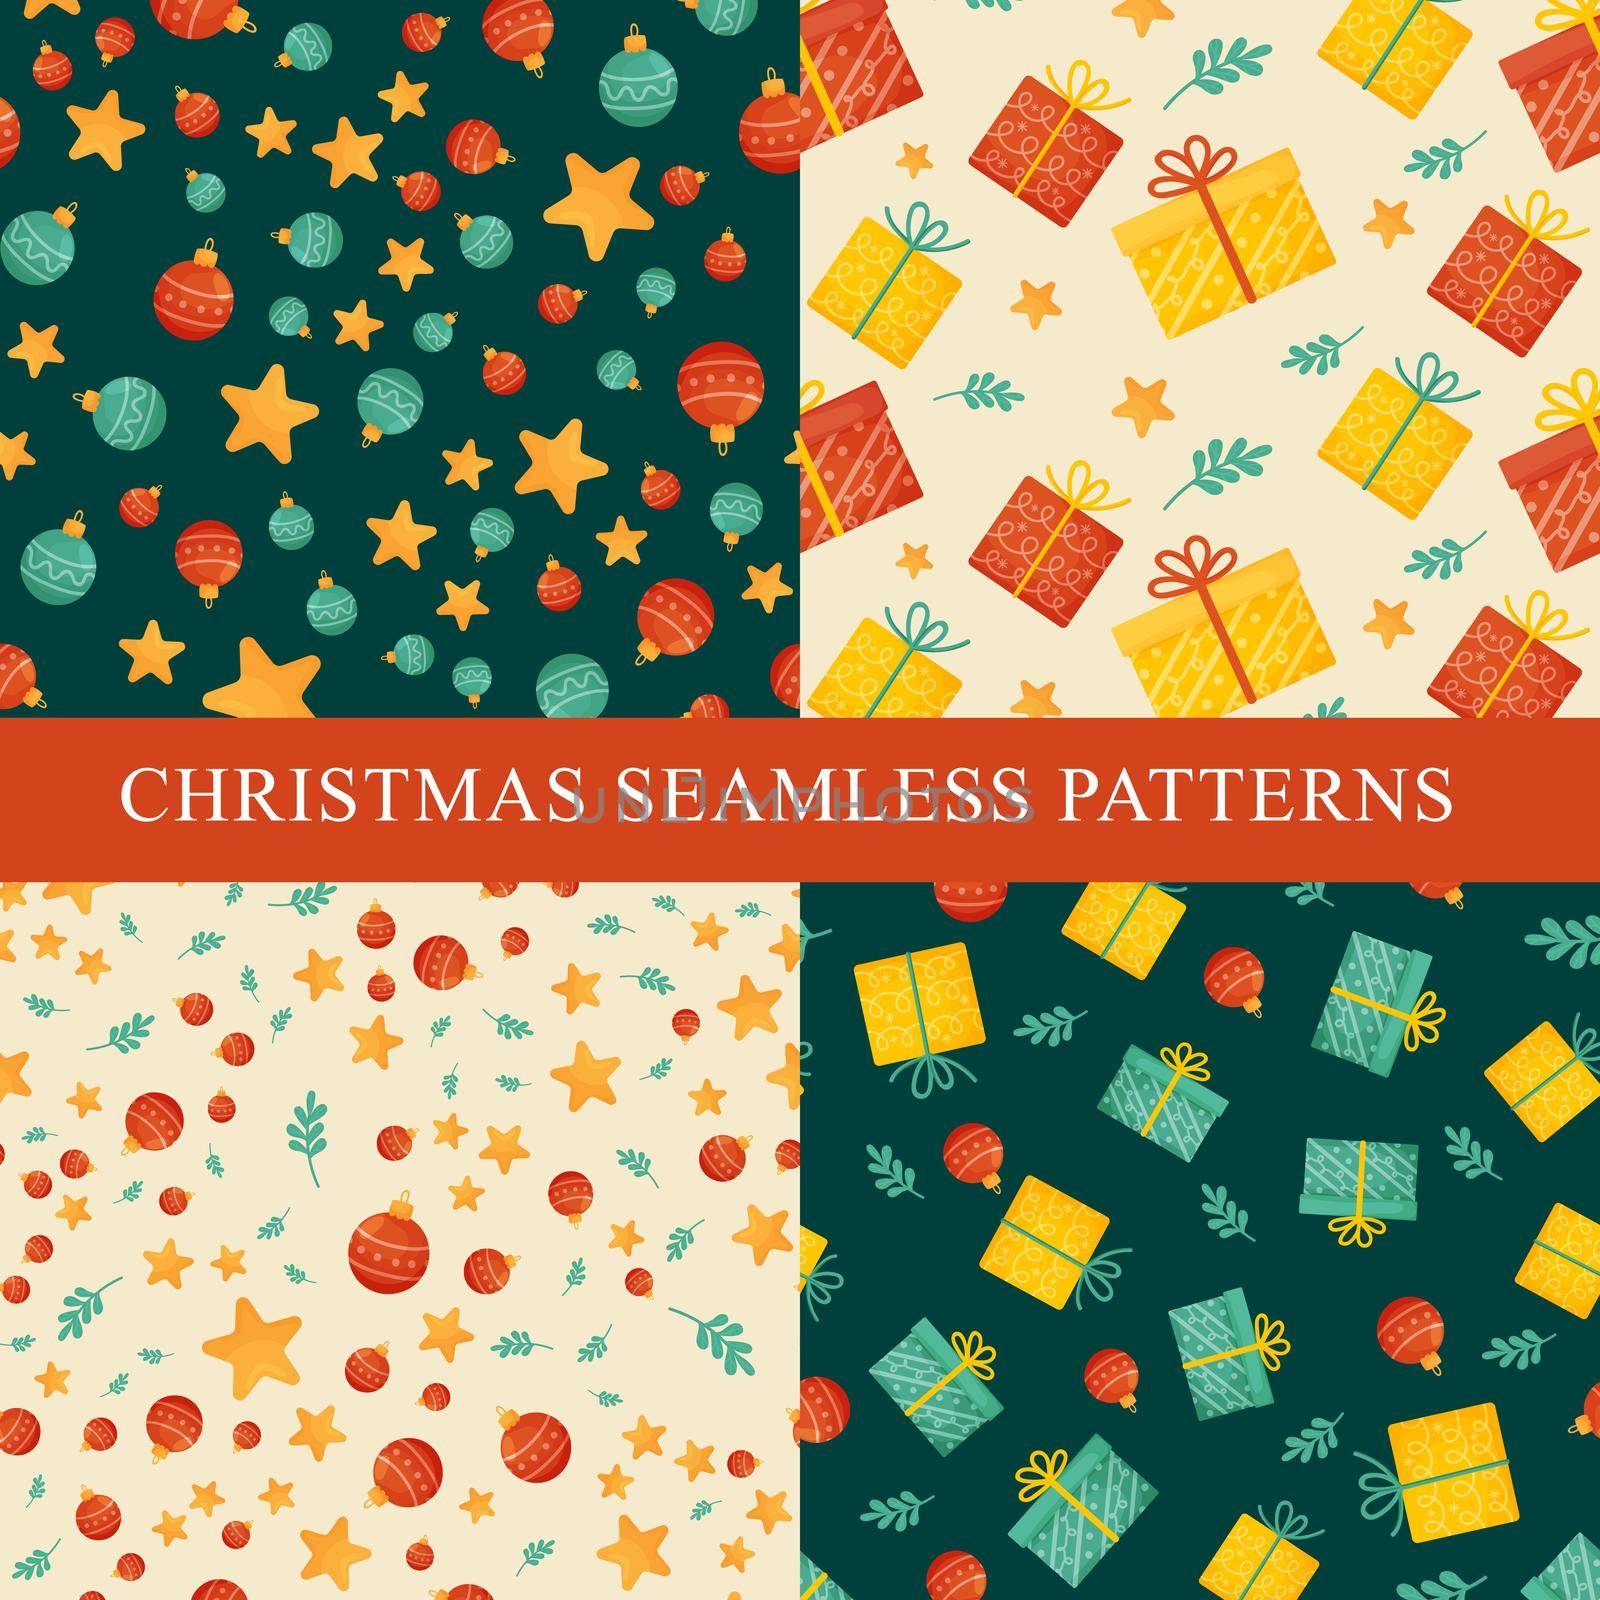 4 christmas seamless patterns in retro style. Endless texture for wallpaper, web page background, wrapping paper, etc. Vector illustration.